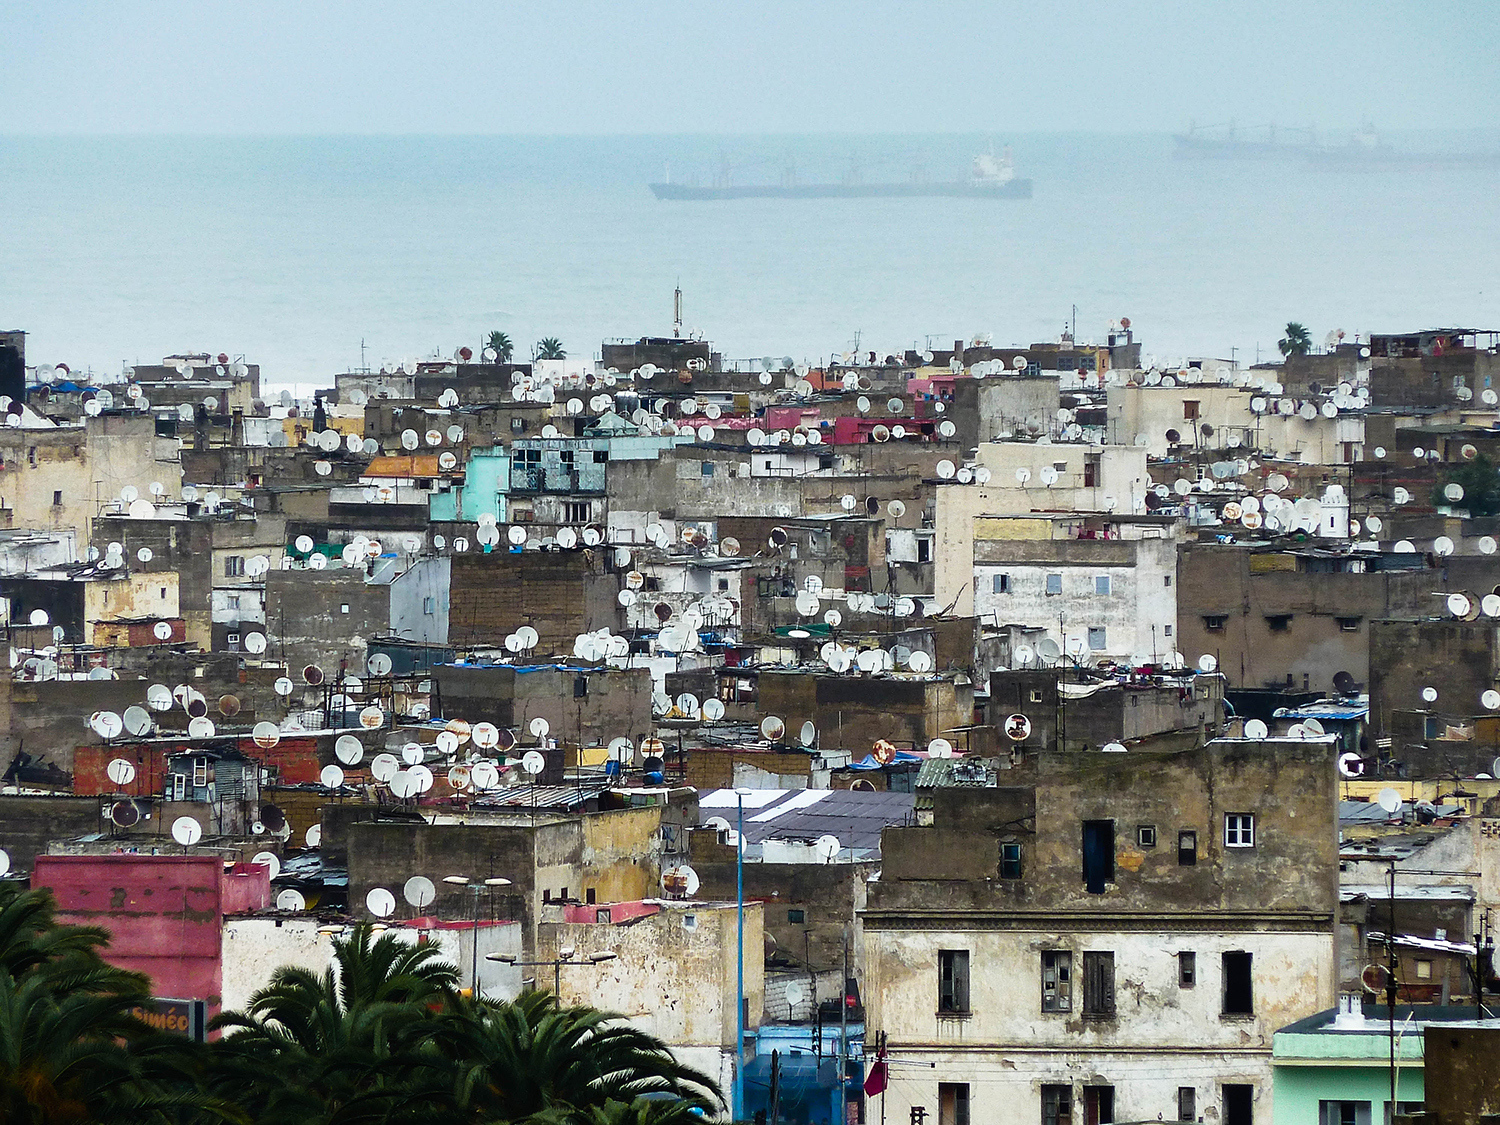 <p>A view out to sea over the rooftops of Casablanca. The preponderance of satellite dishes is striking.<br /></p>